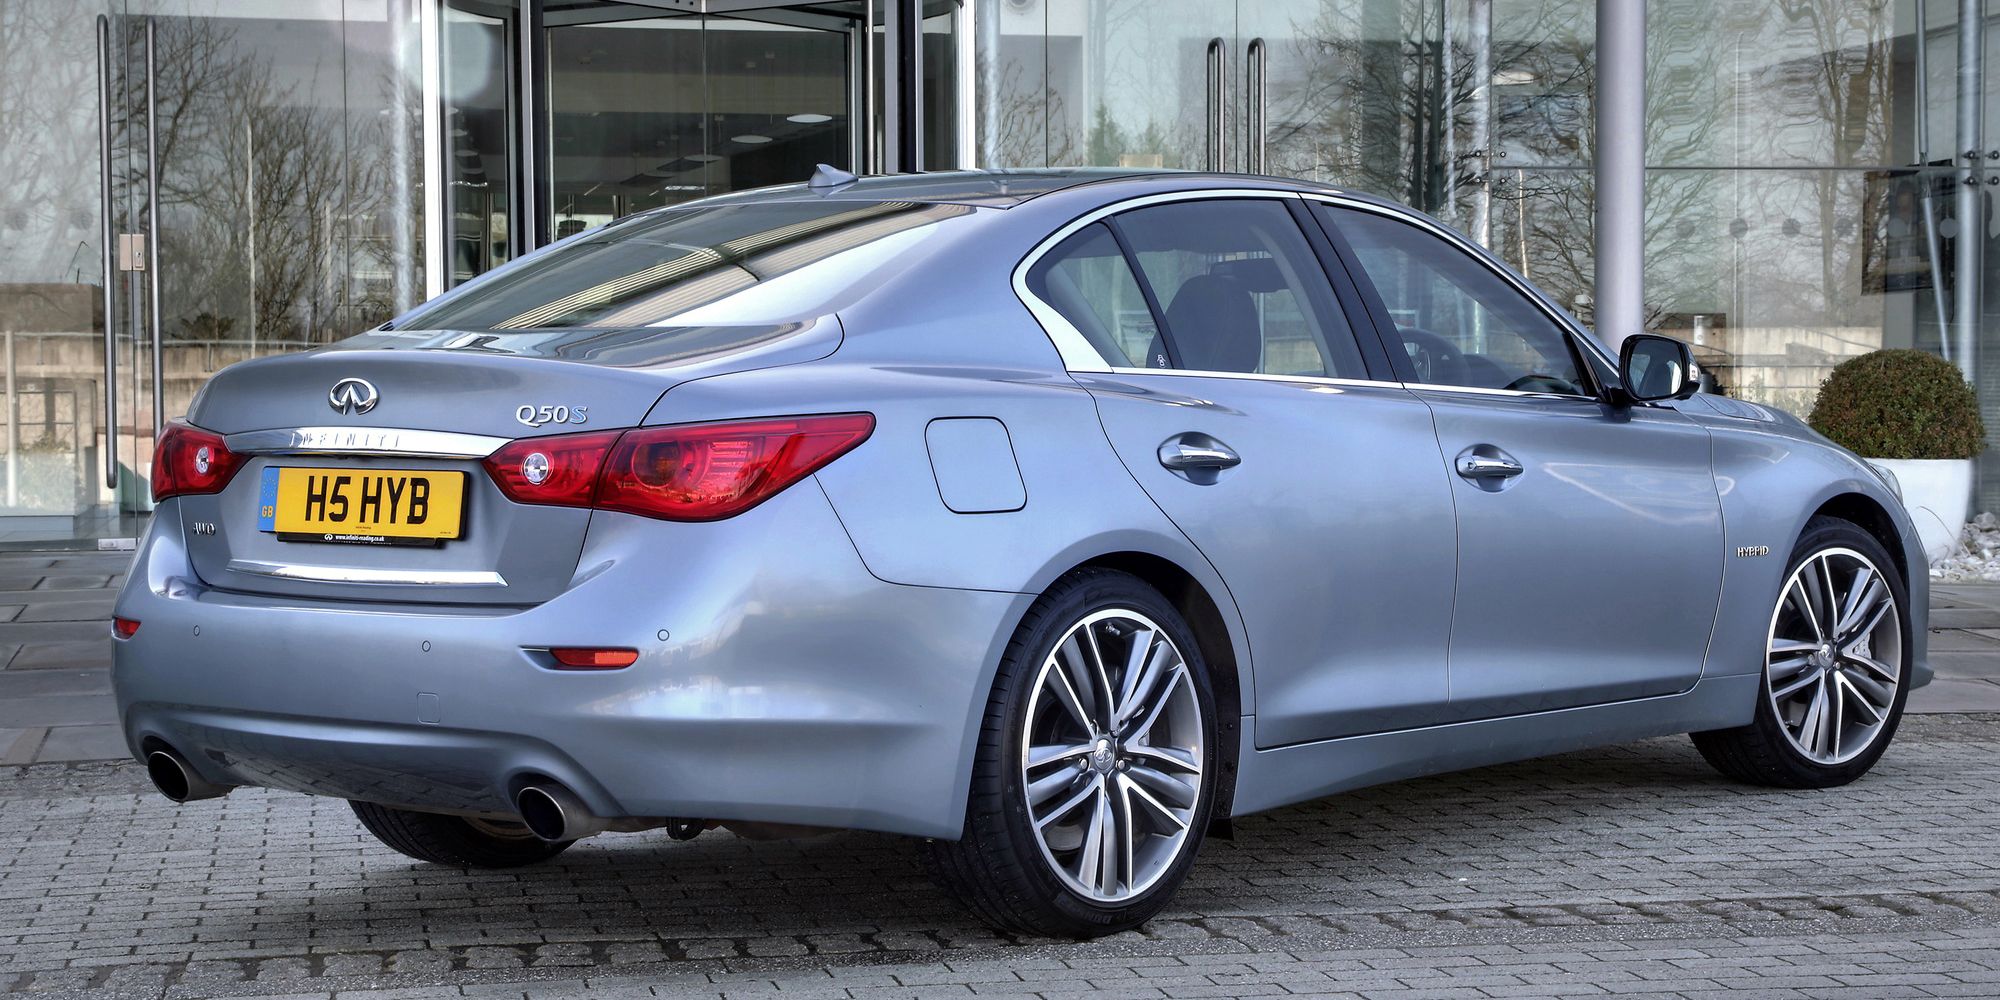 Rear 3/4 view of the Q50 Hybrid